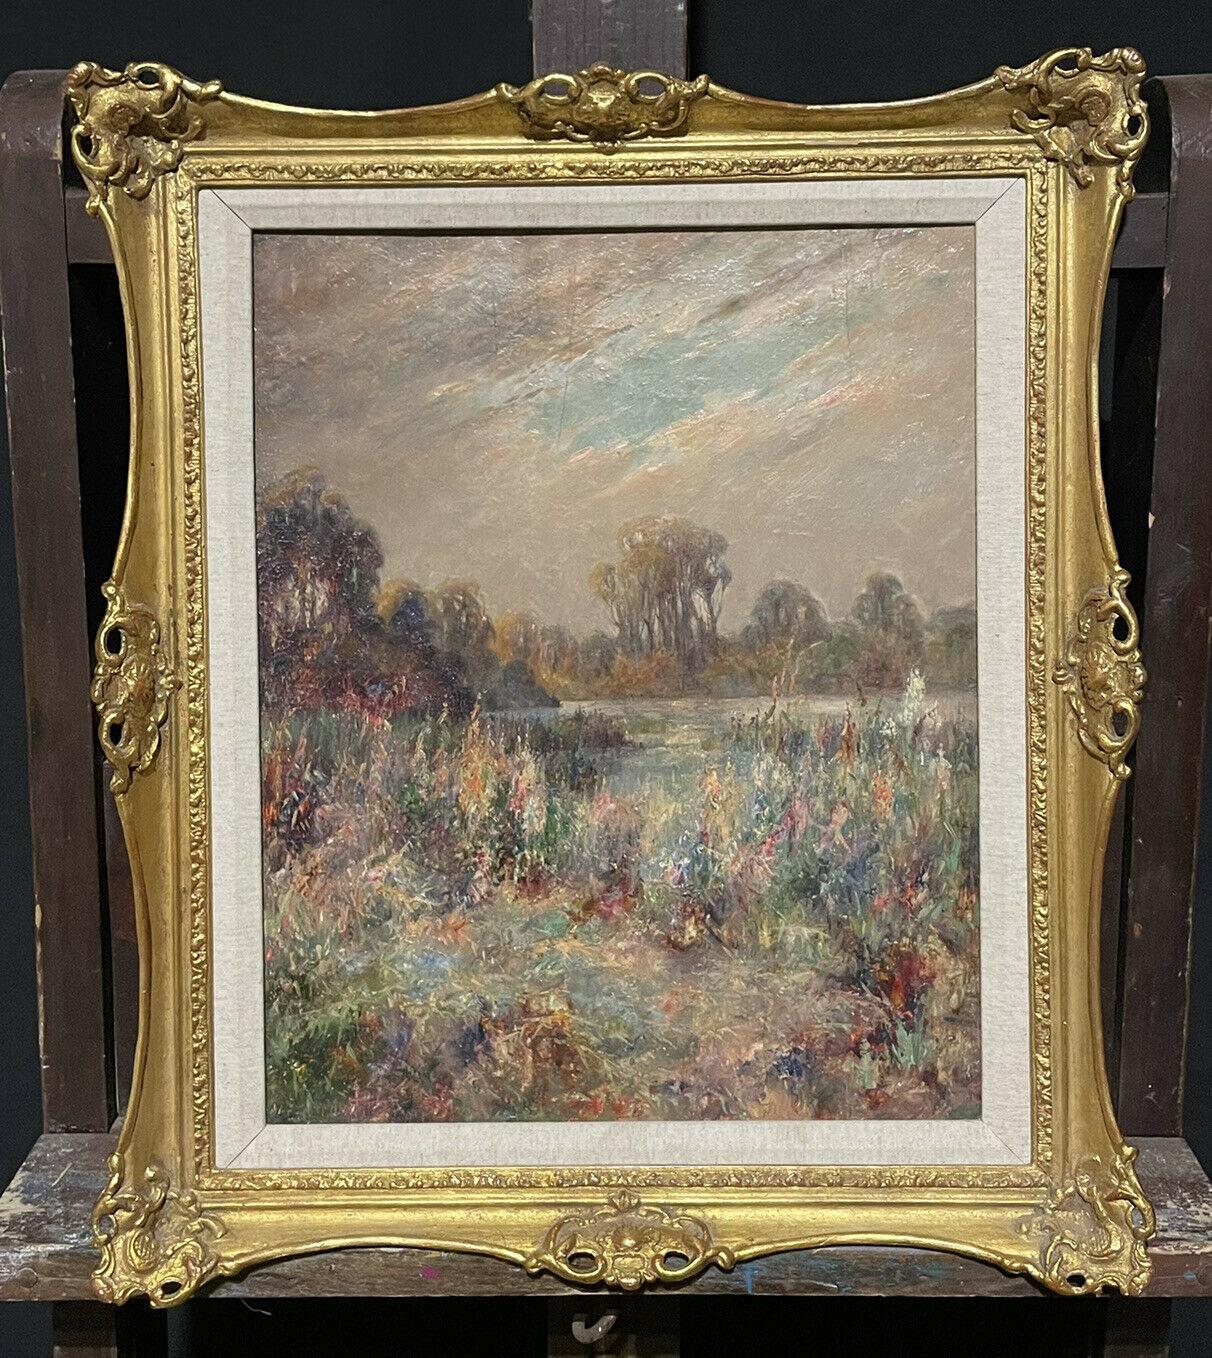 Artist/ School: Scottish School, early 20th century

Title: Wildflowers in a Meadow, next to a river. Beautiful Impressionist brushwork and warm colors. 

Medium:  oil painting on wooden panel, framed

framed:   22 x  19 inches
painting:  17.5 x